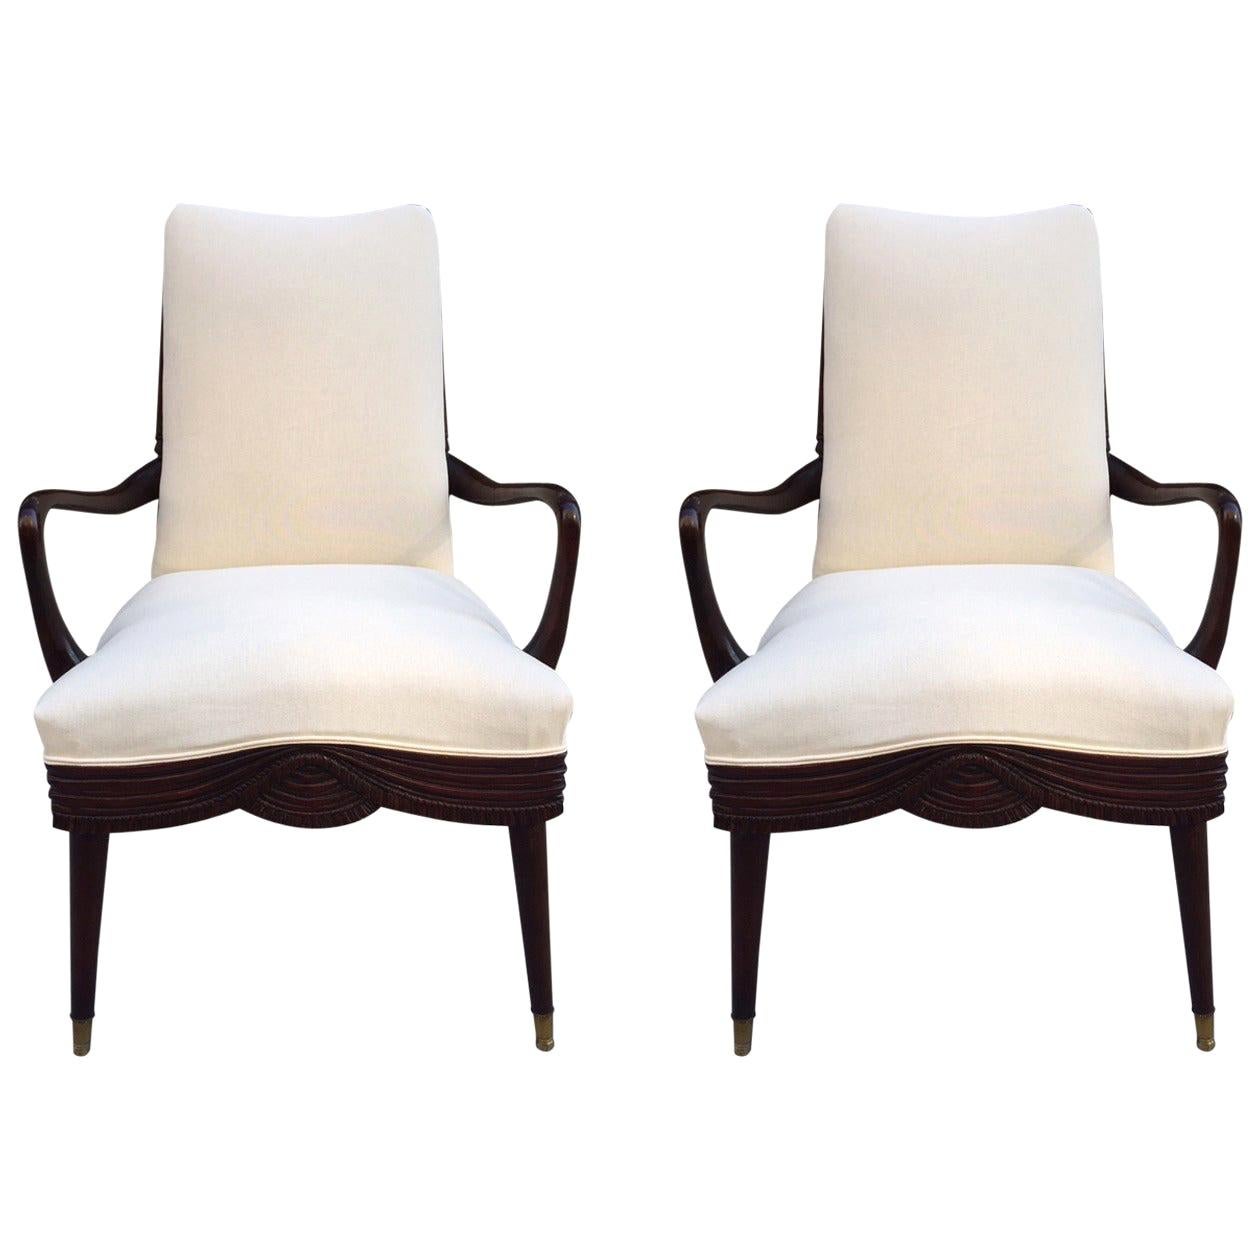 Pair of French Art Deco Side Chairs